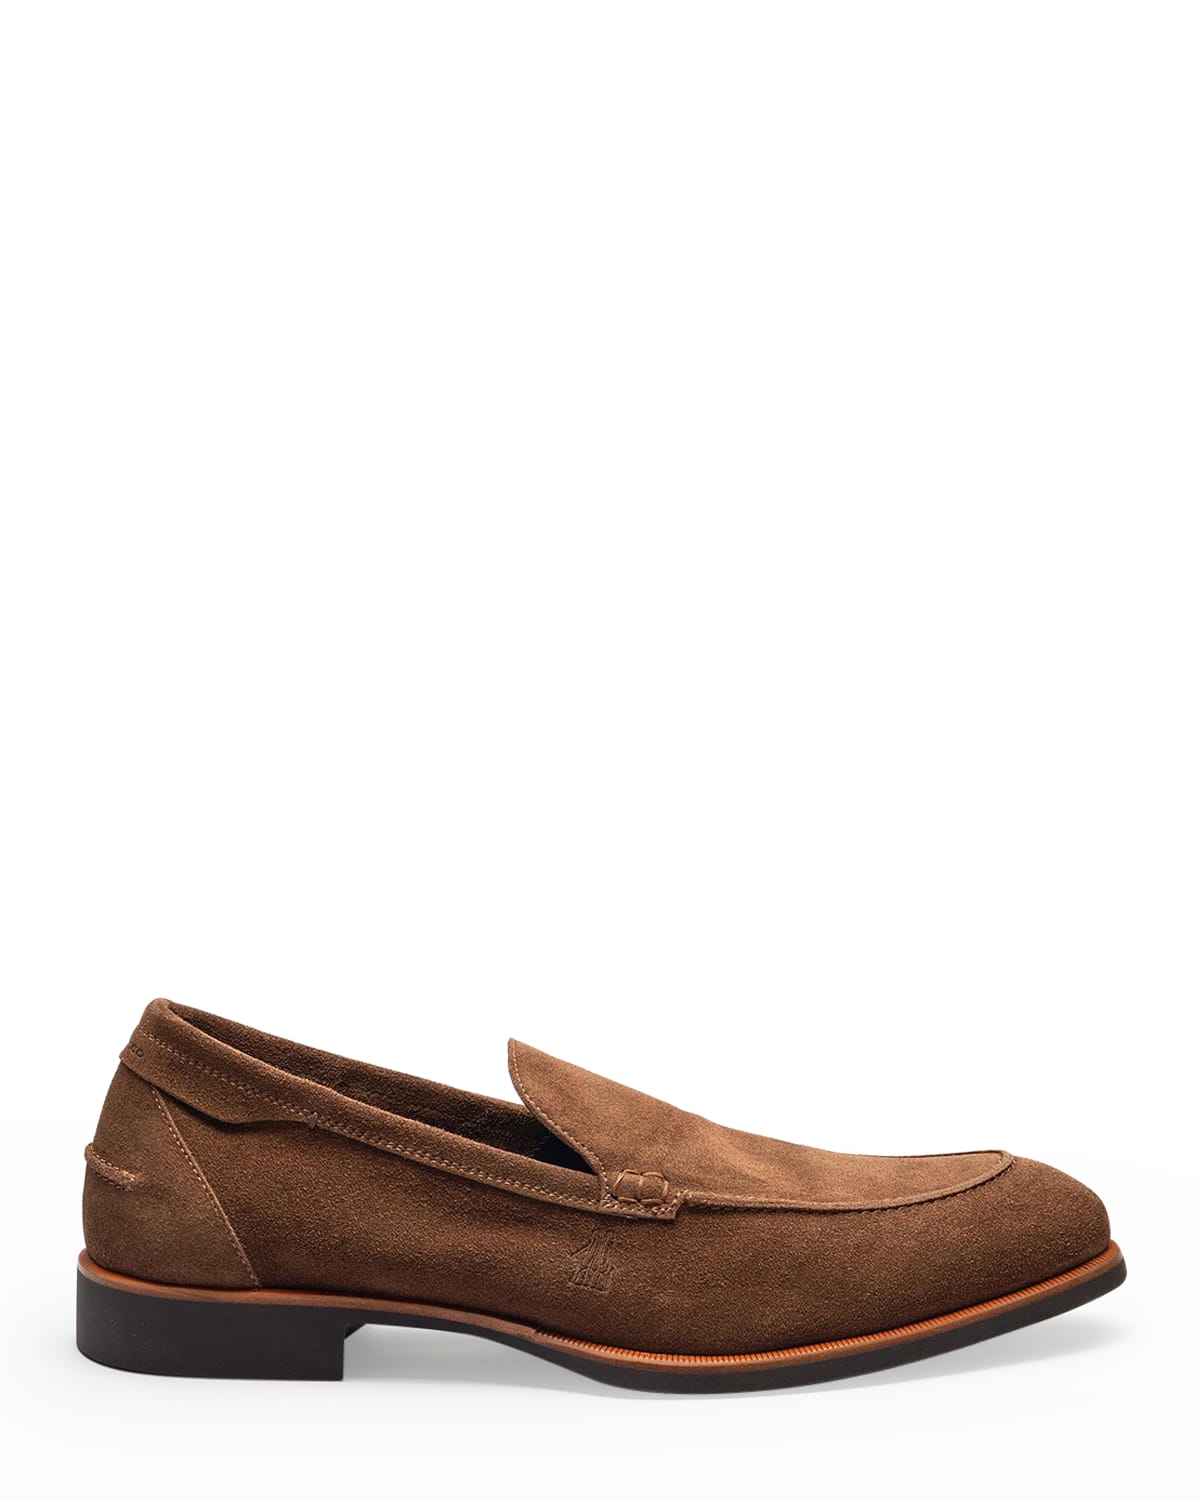 di Bianco Men's Etna Almond-Toe Suede Loafers